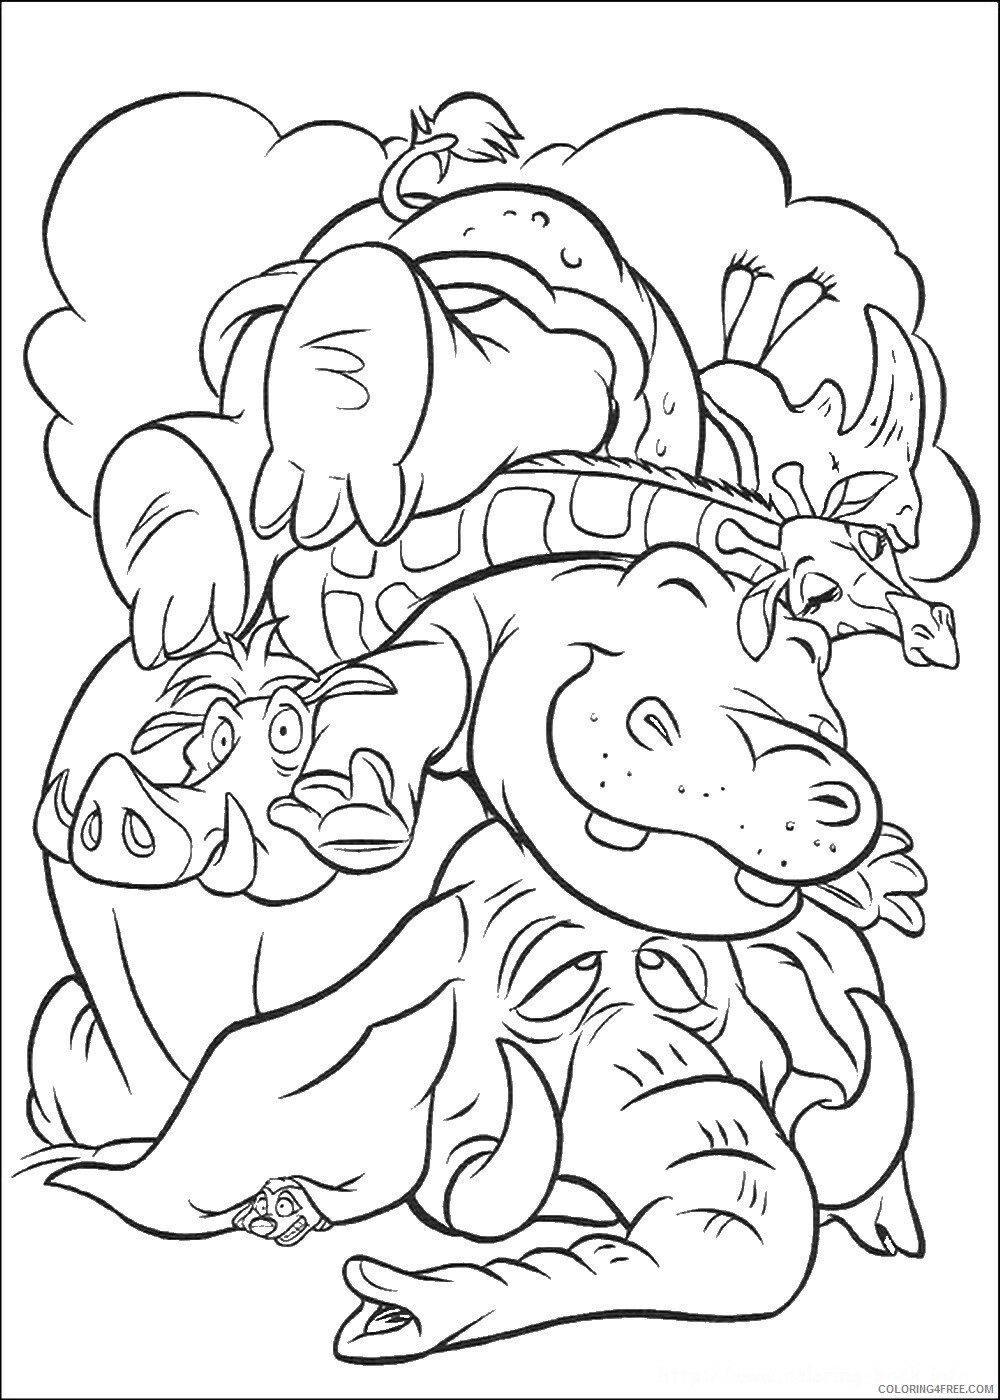 The Lion King Coloring Pages TV Film lionking_50 Printable 2020 09172 Coloring4free